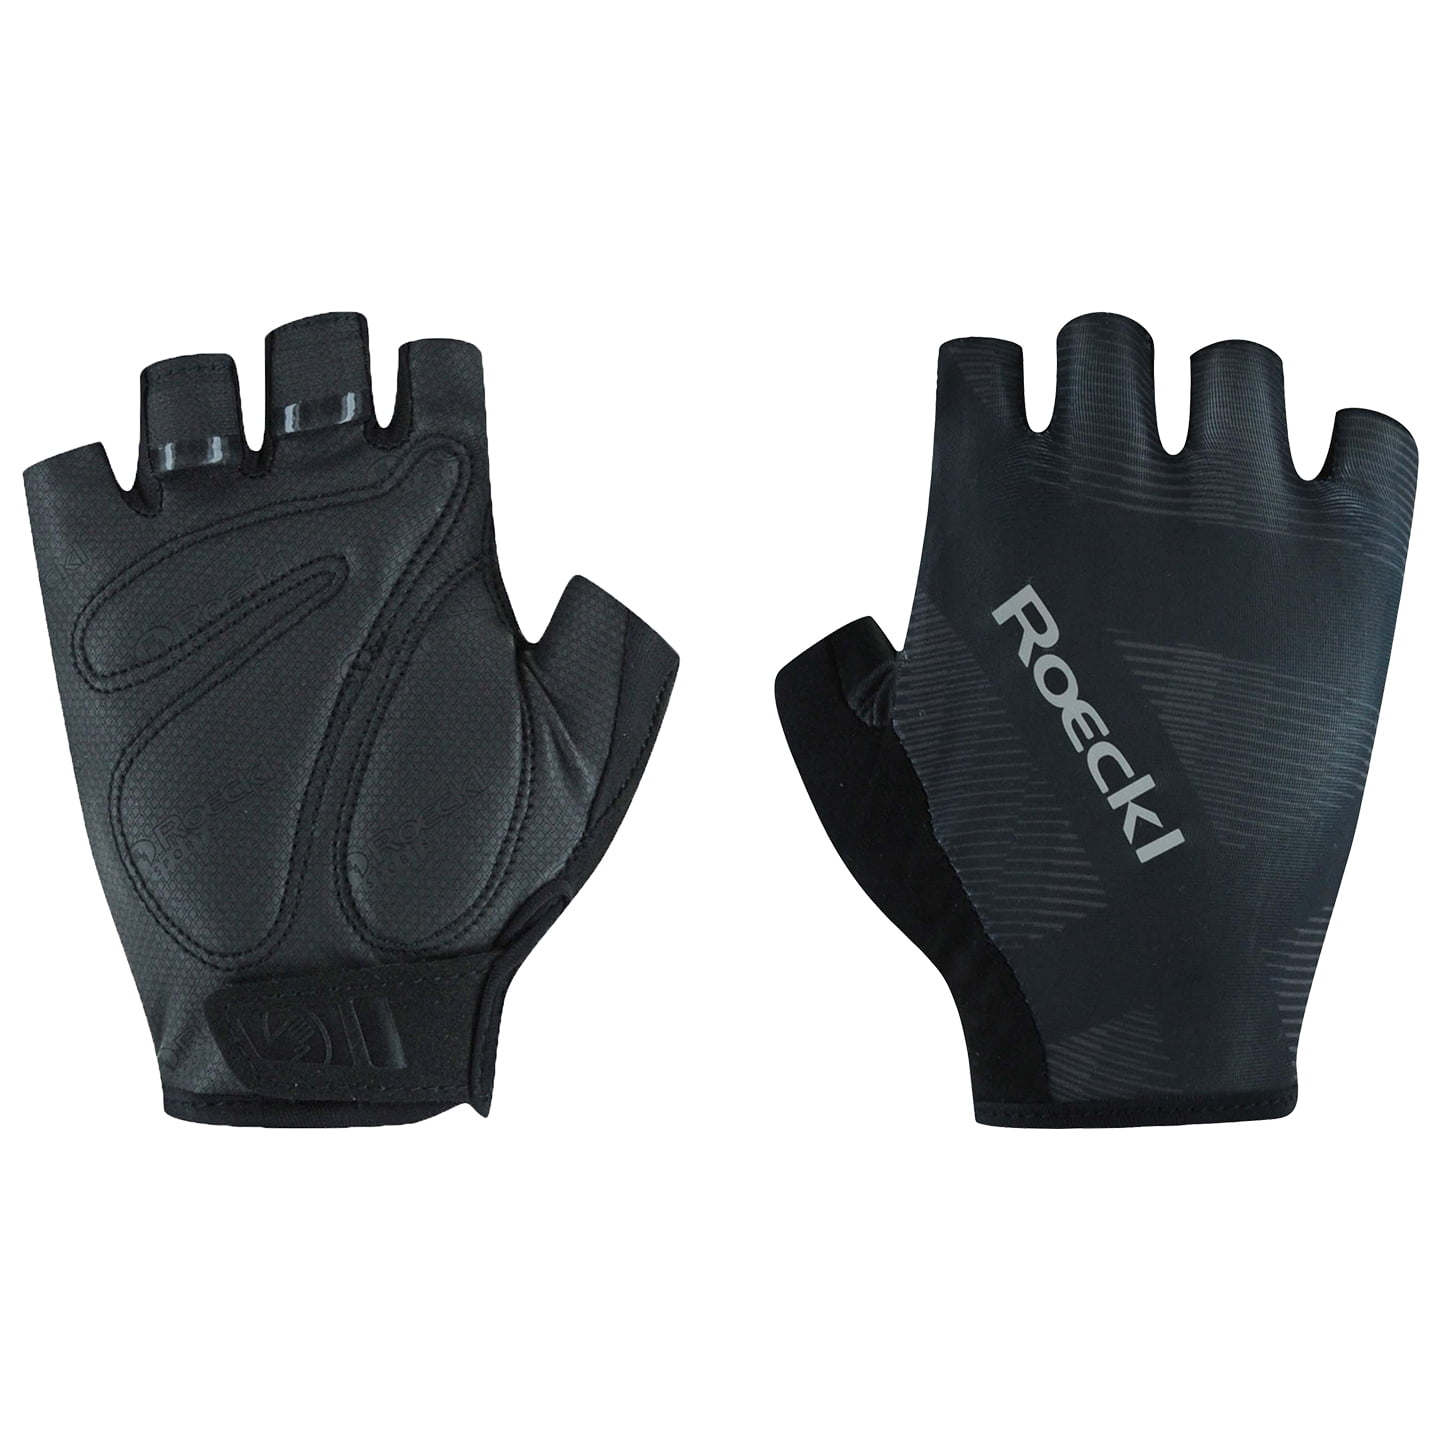 ROECKL Busano Gloves Cycling Gloves, for men, size 11, Cycle gloves, MTB gear